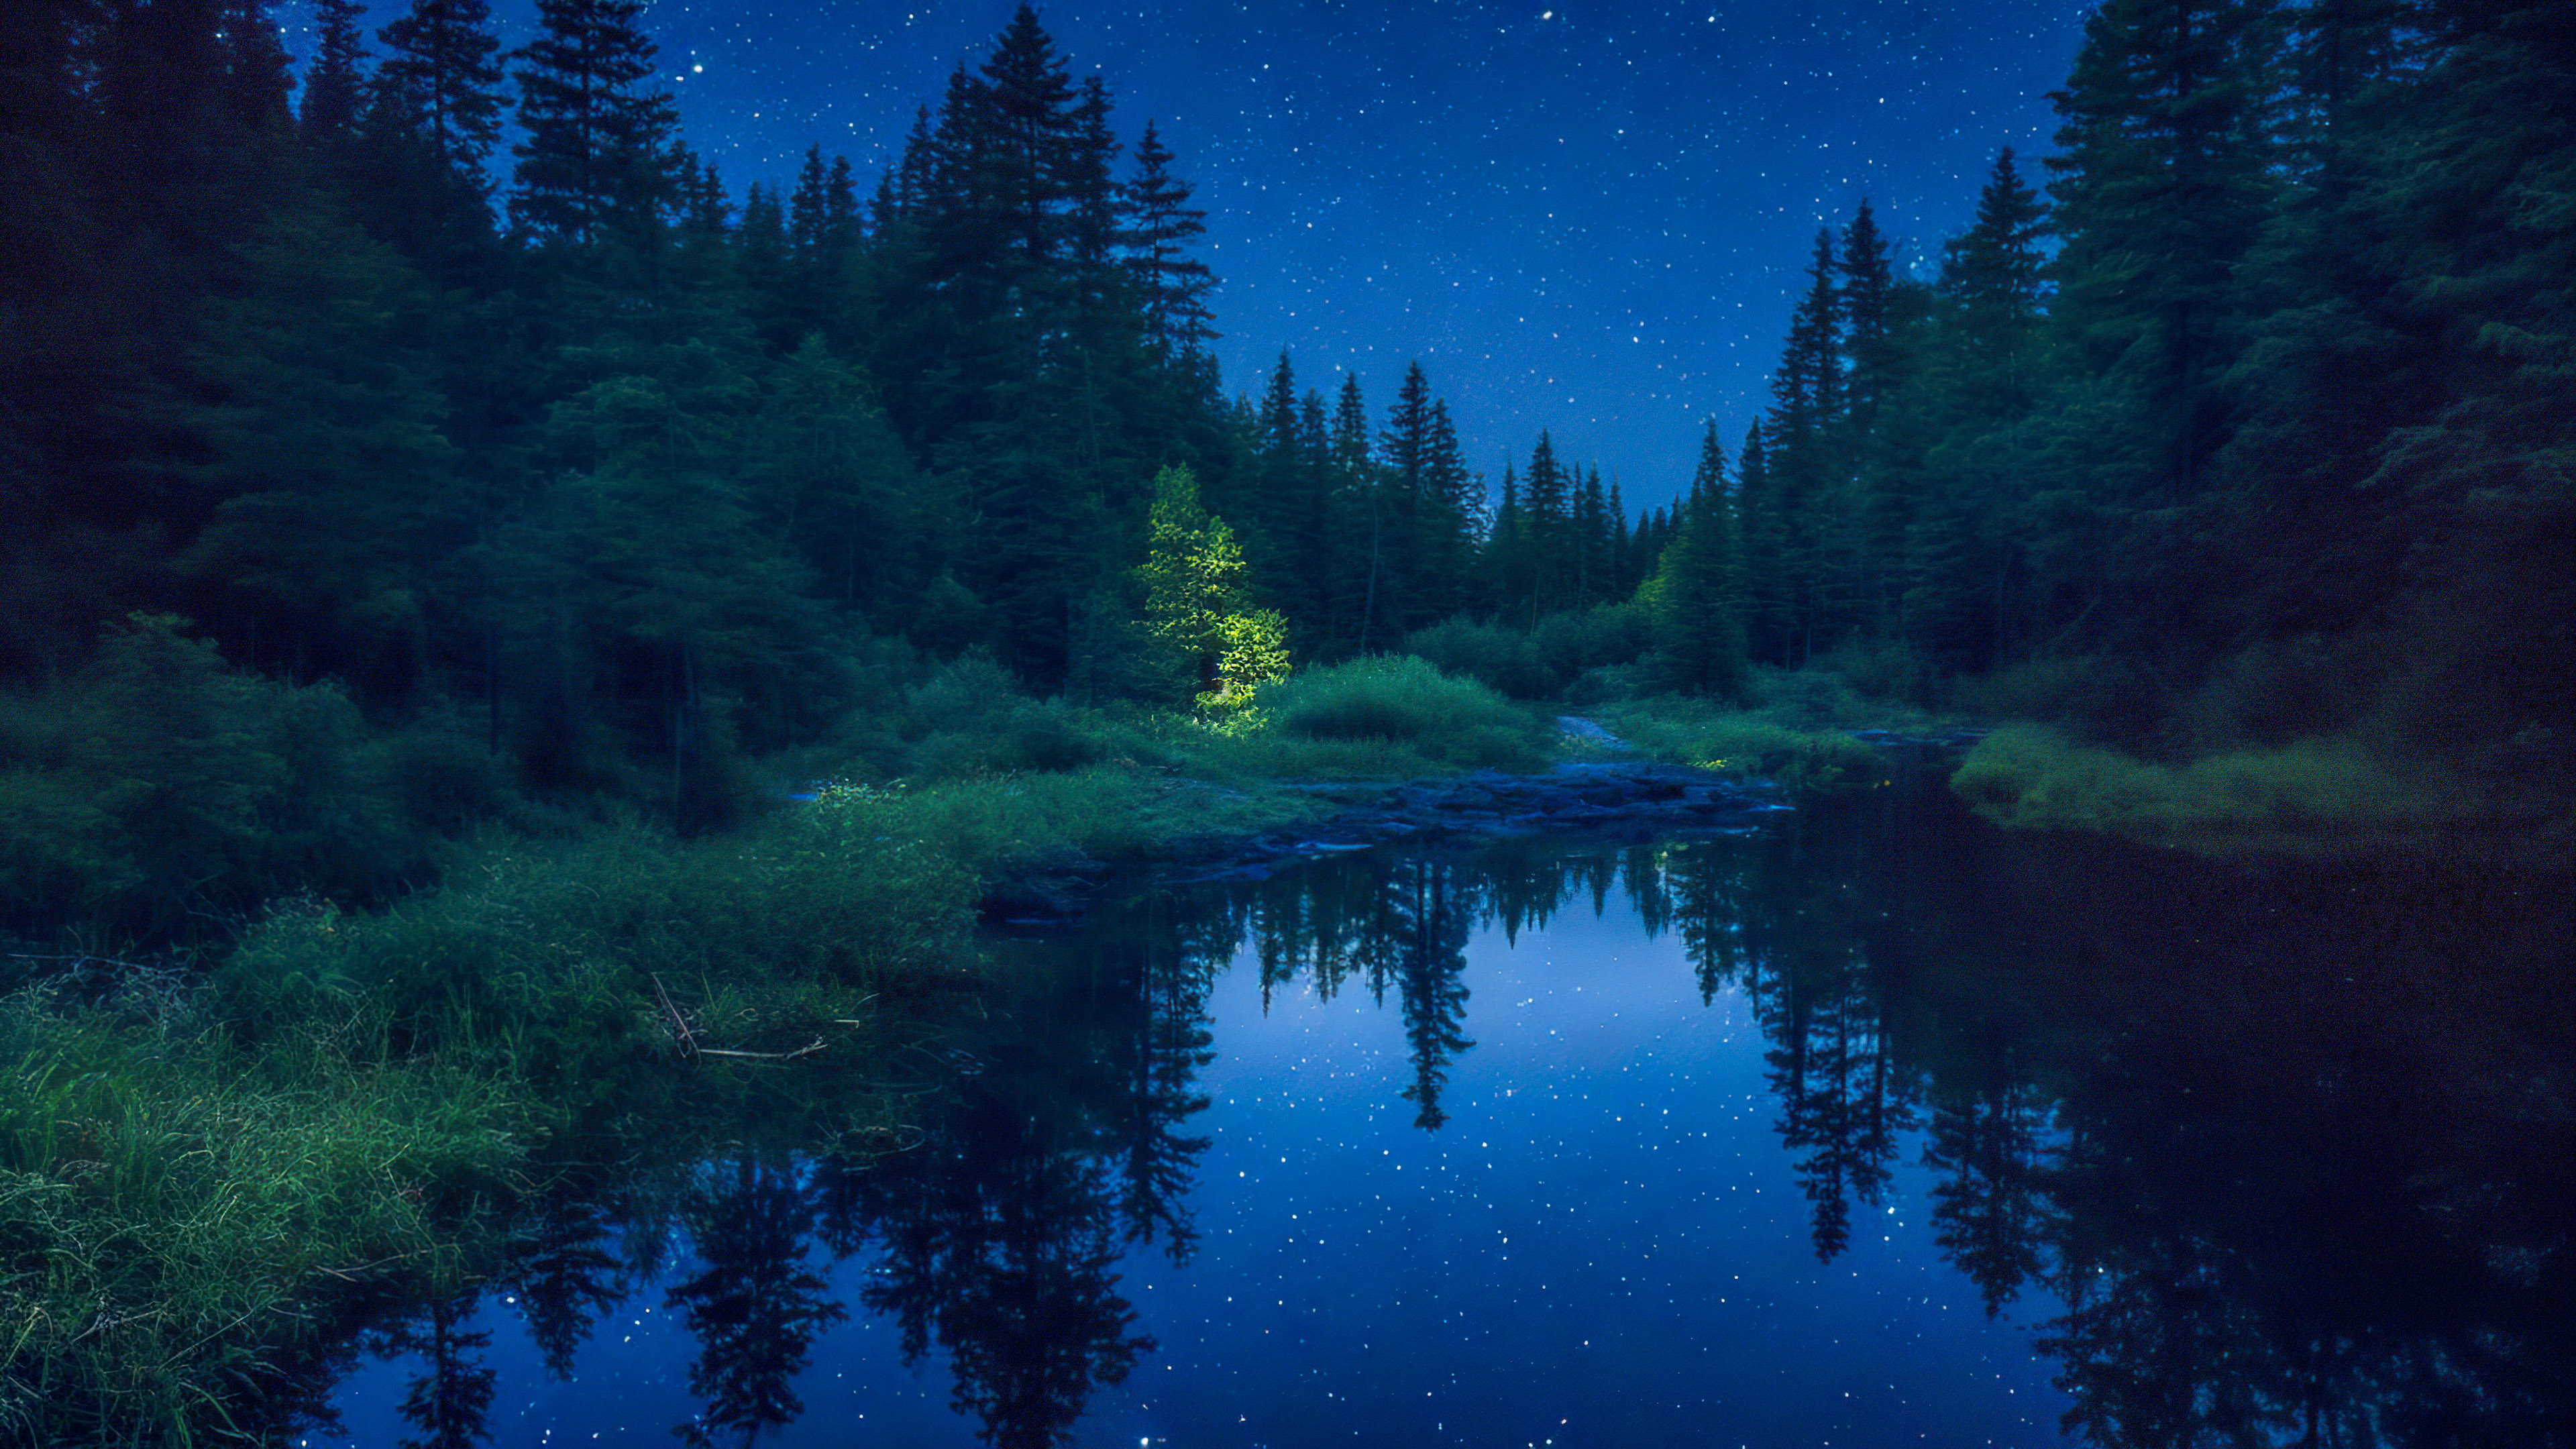 Experience the tranquility of our beautiful night background, featuring a peaceful river winding through a dense forest, reflecting the sparkling night sky.